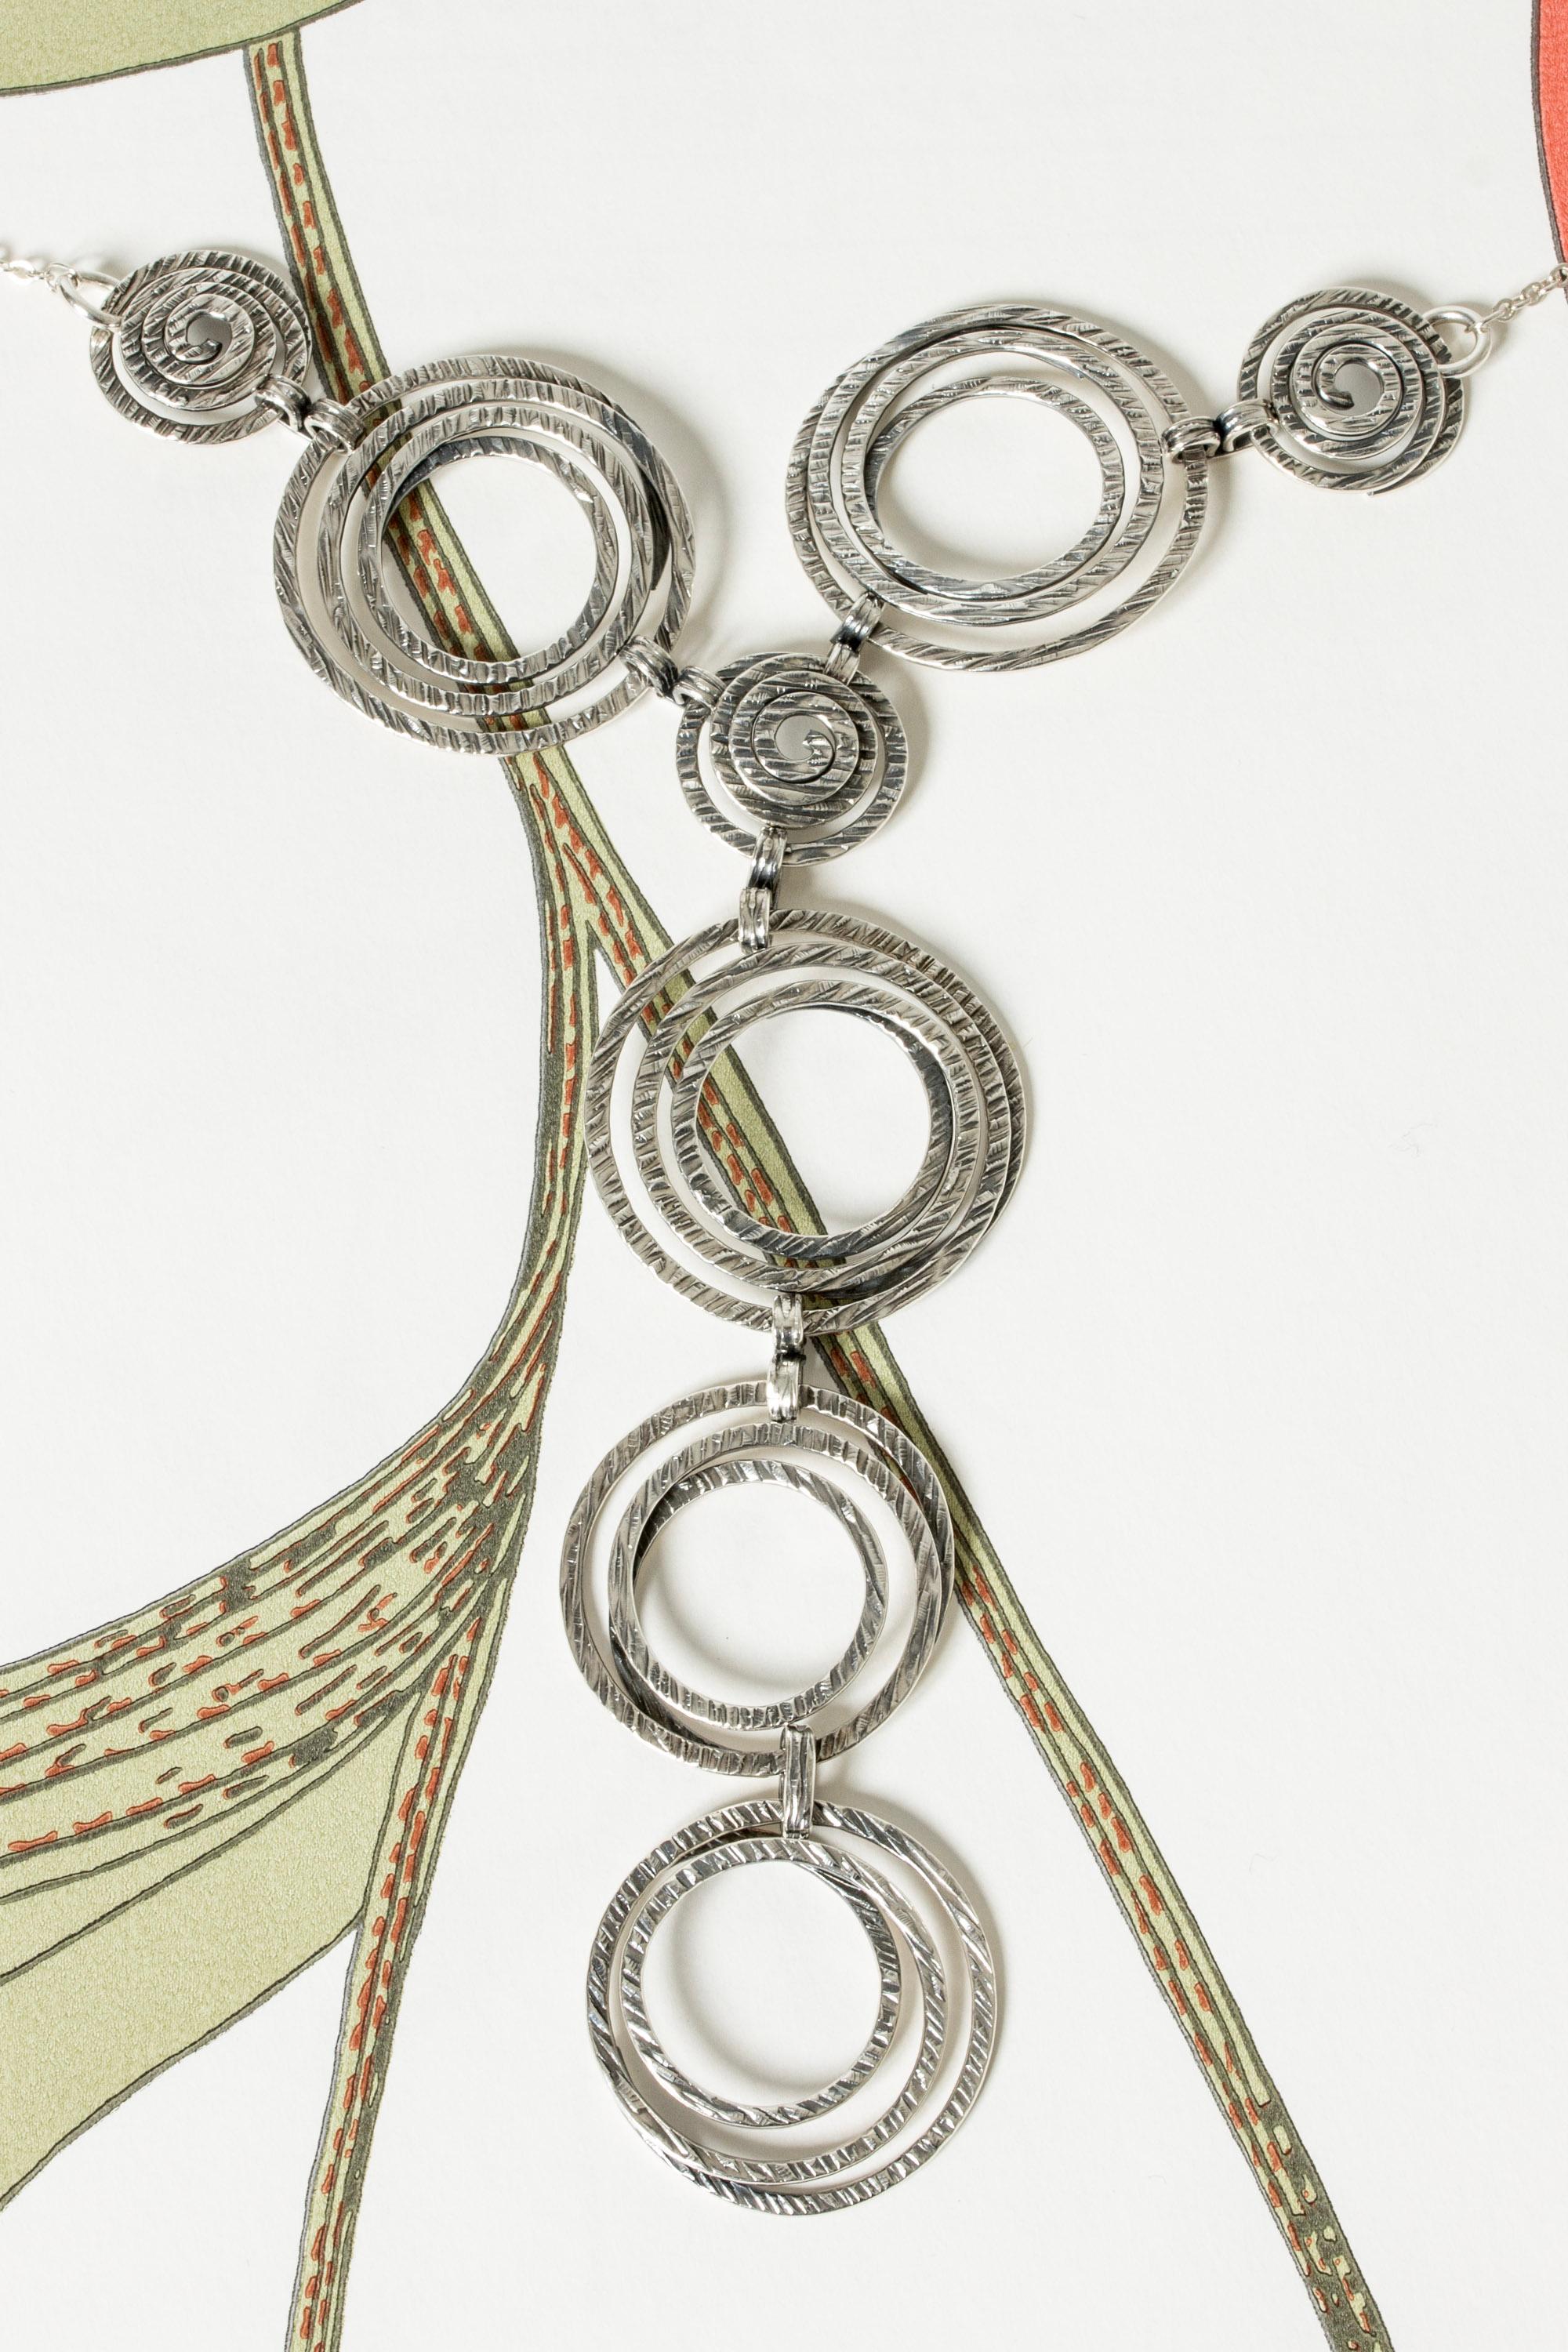 Striking modernist silver collier by Elis Kauppi, with a large pendant of spirals. Rugged surface on the spirals, a subtle folkloristic feel. Looks amazing with a plunging neckline.

Length of chain 34 cm, length of pendant 19 cm.